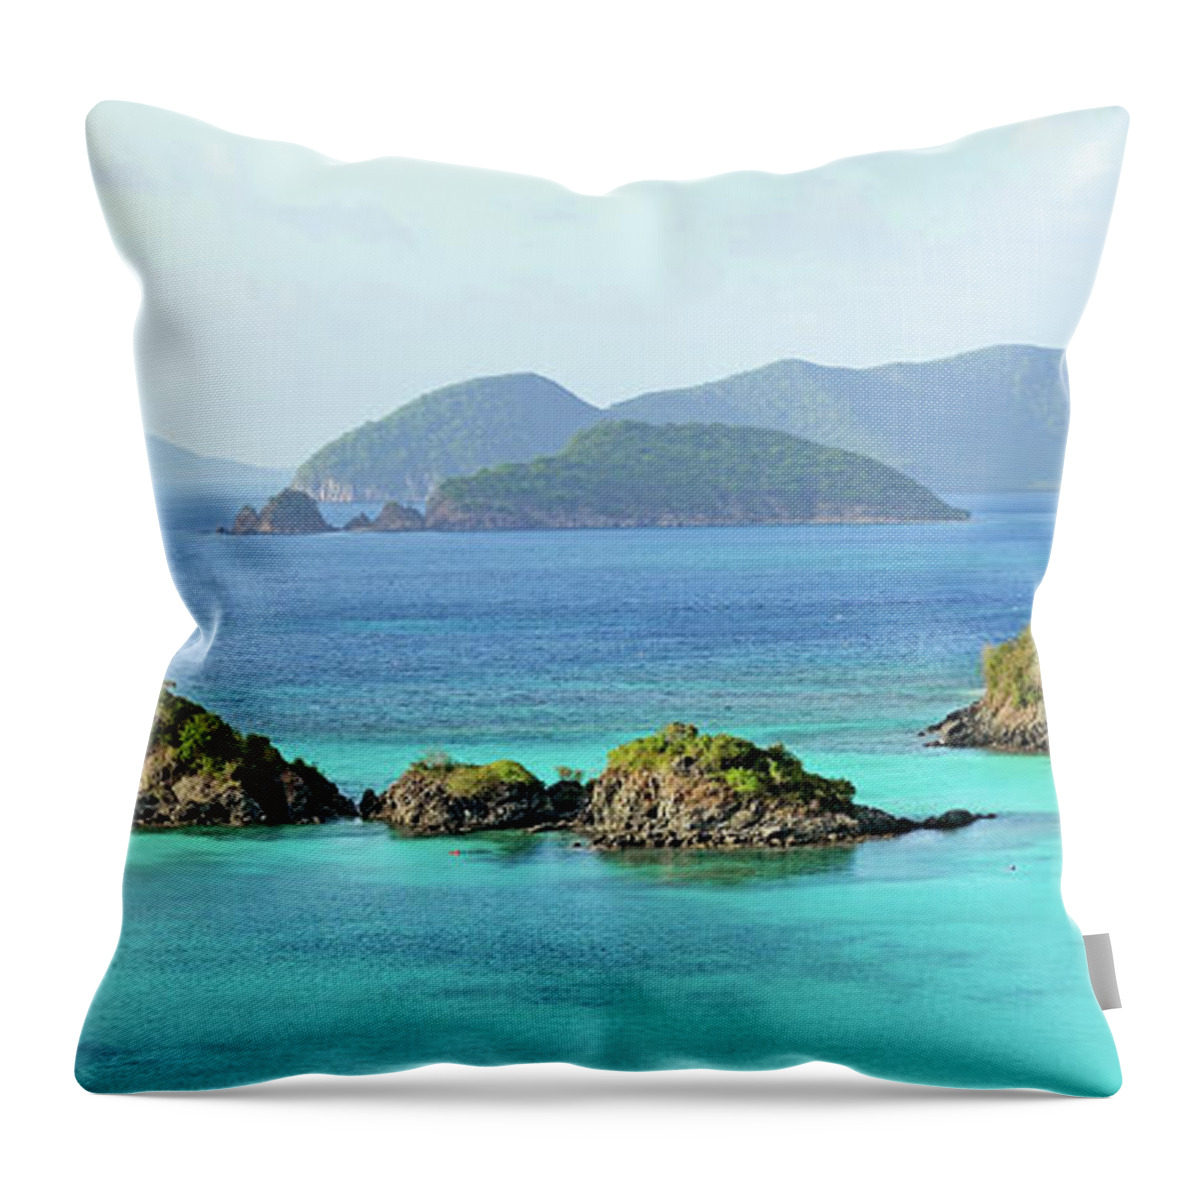 Scenics Throw Pillow featuring the photograph Breath-taking View Of Trunk Bay, St by Driendl Group